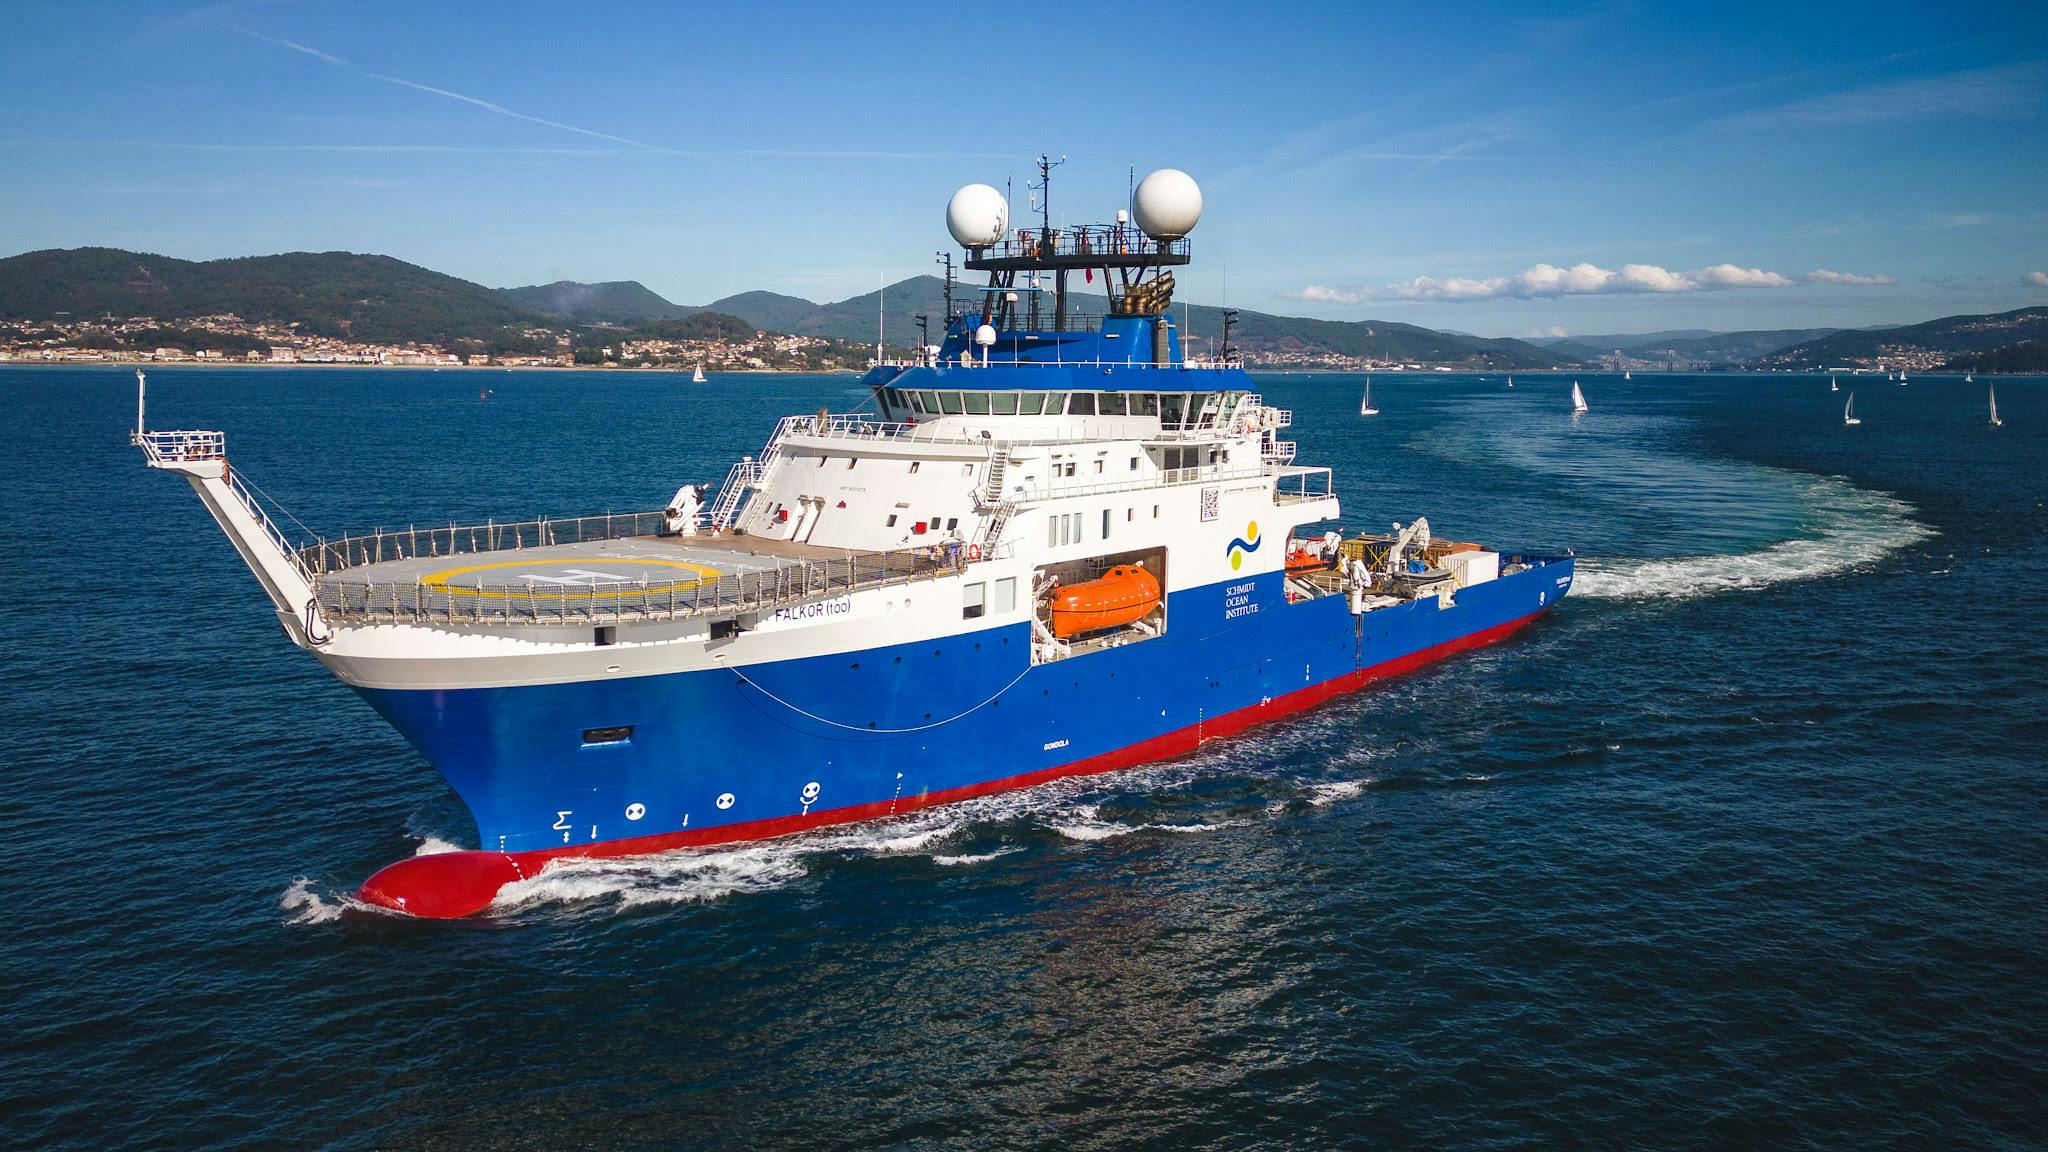 Schmidt Ocean Institute Launches New Research Vessel That Will Change the Face of Ocean Exploration